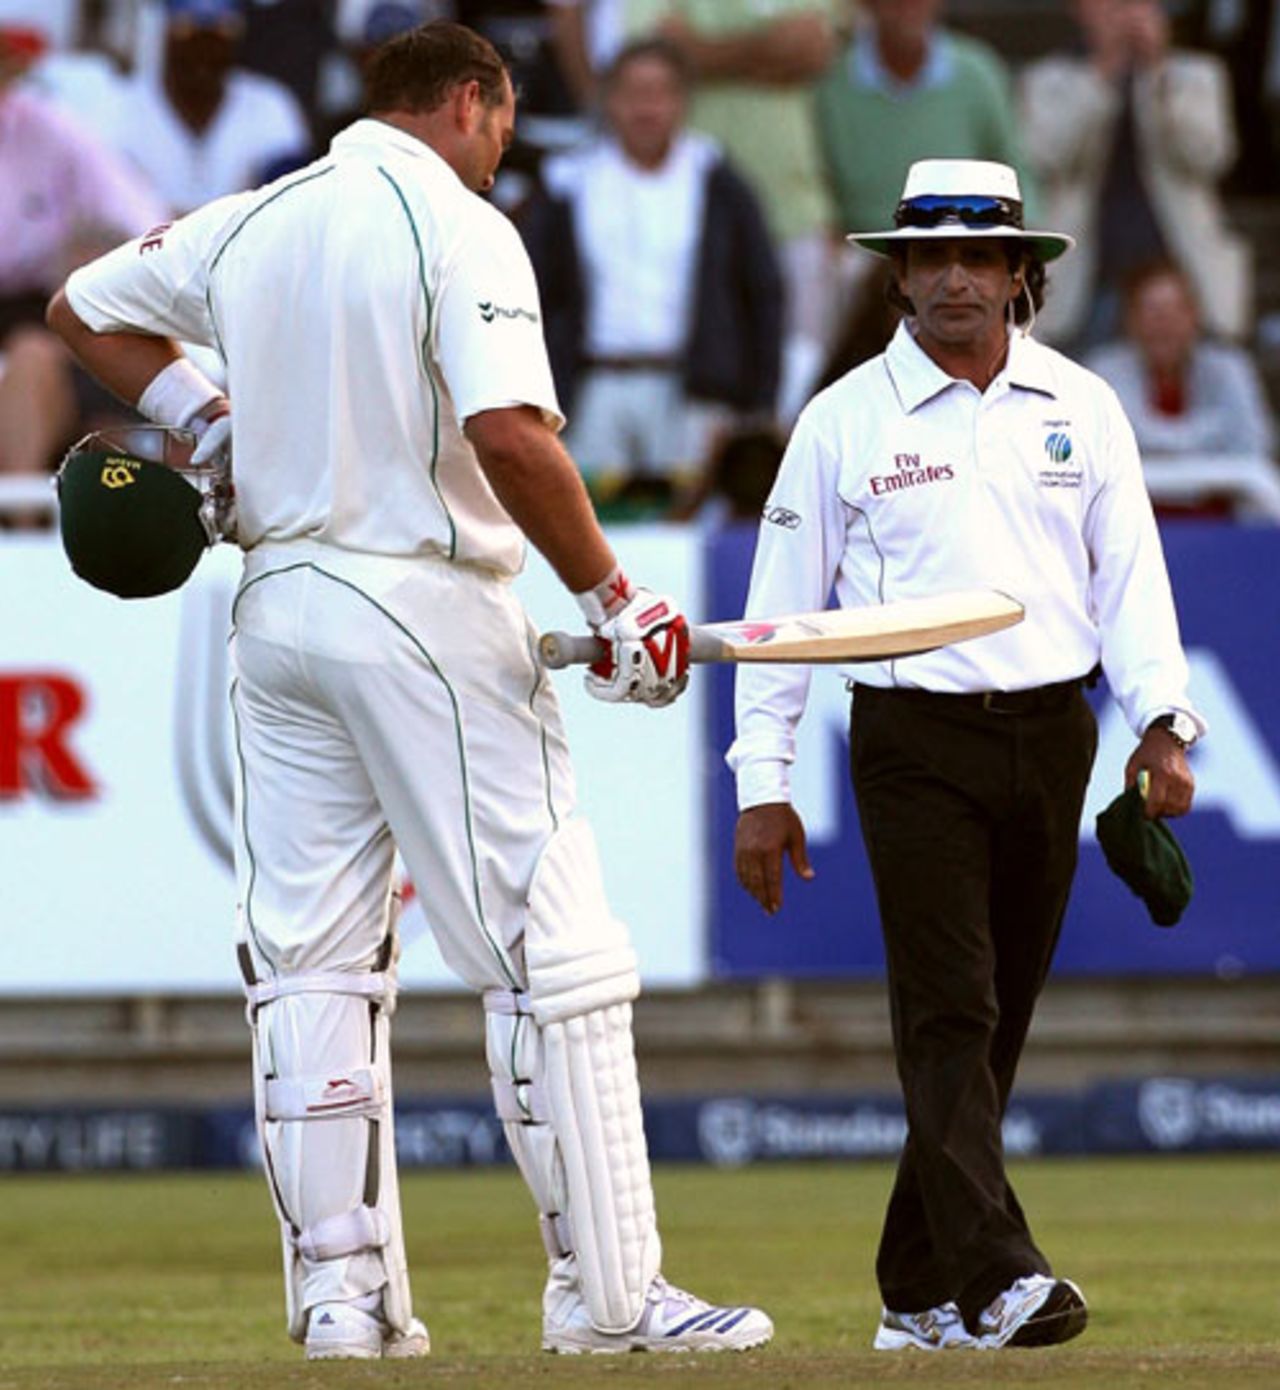 Jacques Kallis explains to Asad Rauf that he inside-edged the ball after a single he took on 99 was ruled a leg-bye, South Africa v Australia, 3rd Test, 2nd day, Cape Town, March 20, 2009